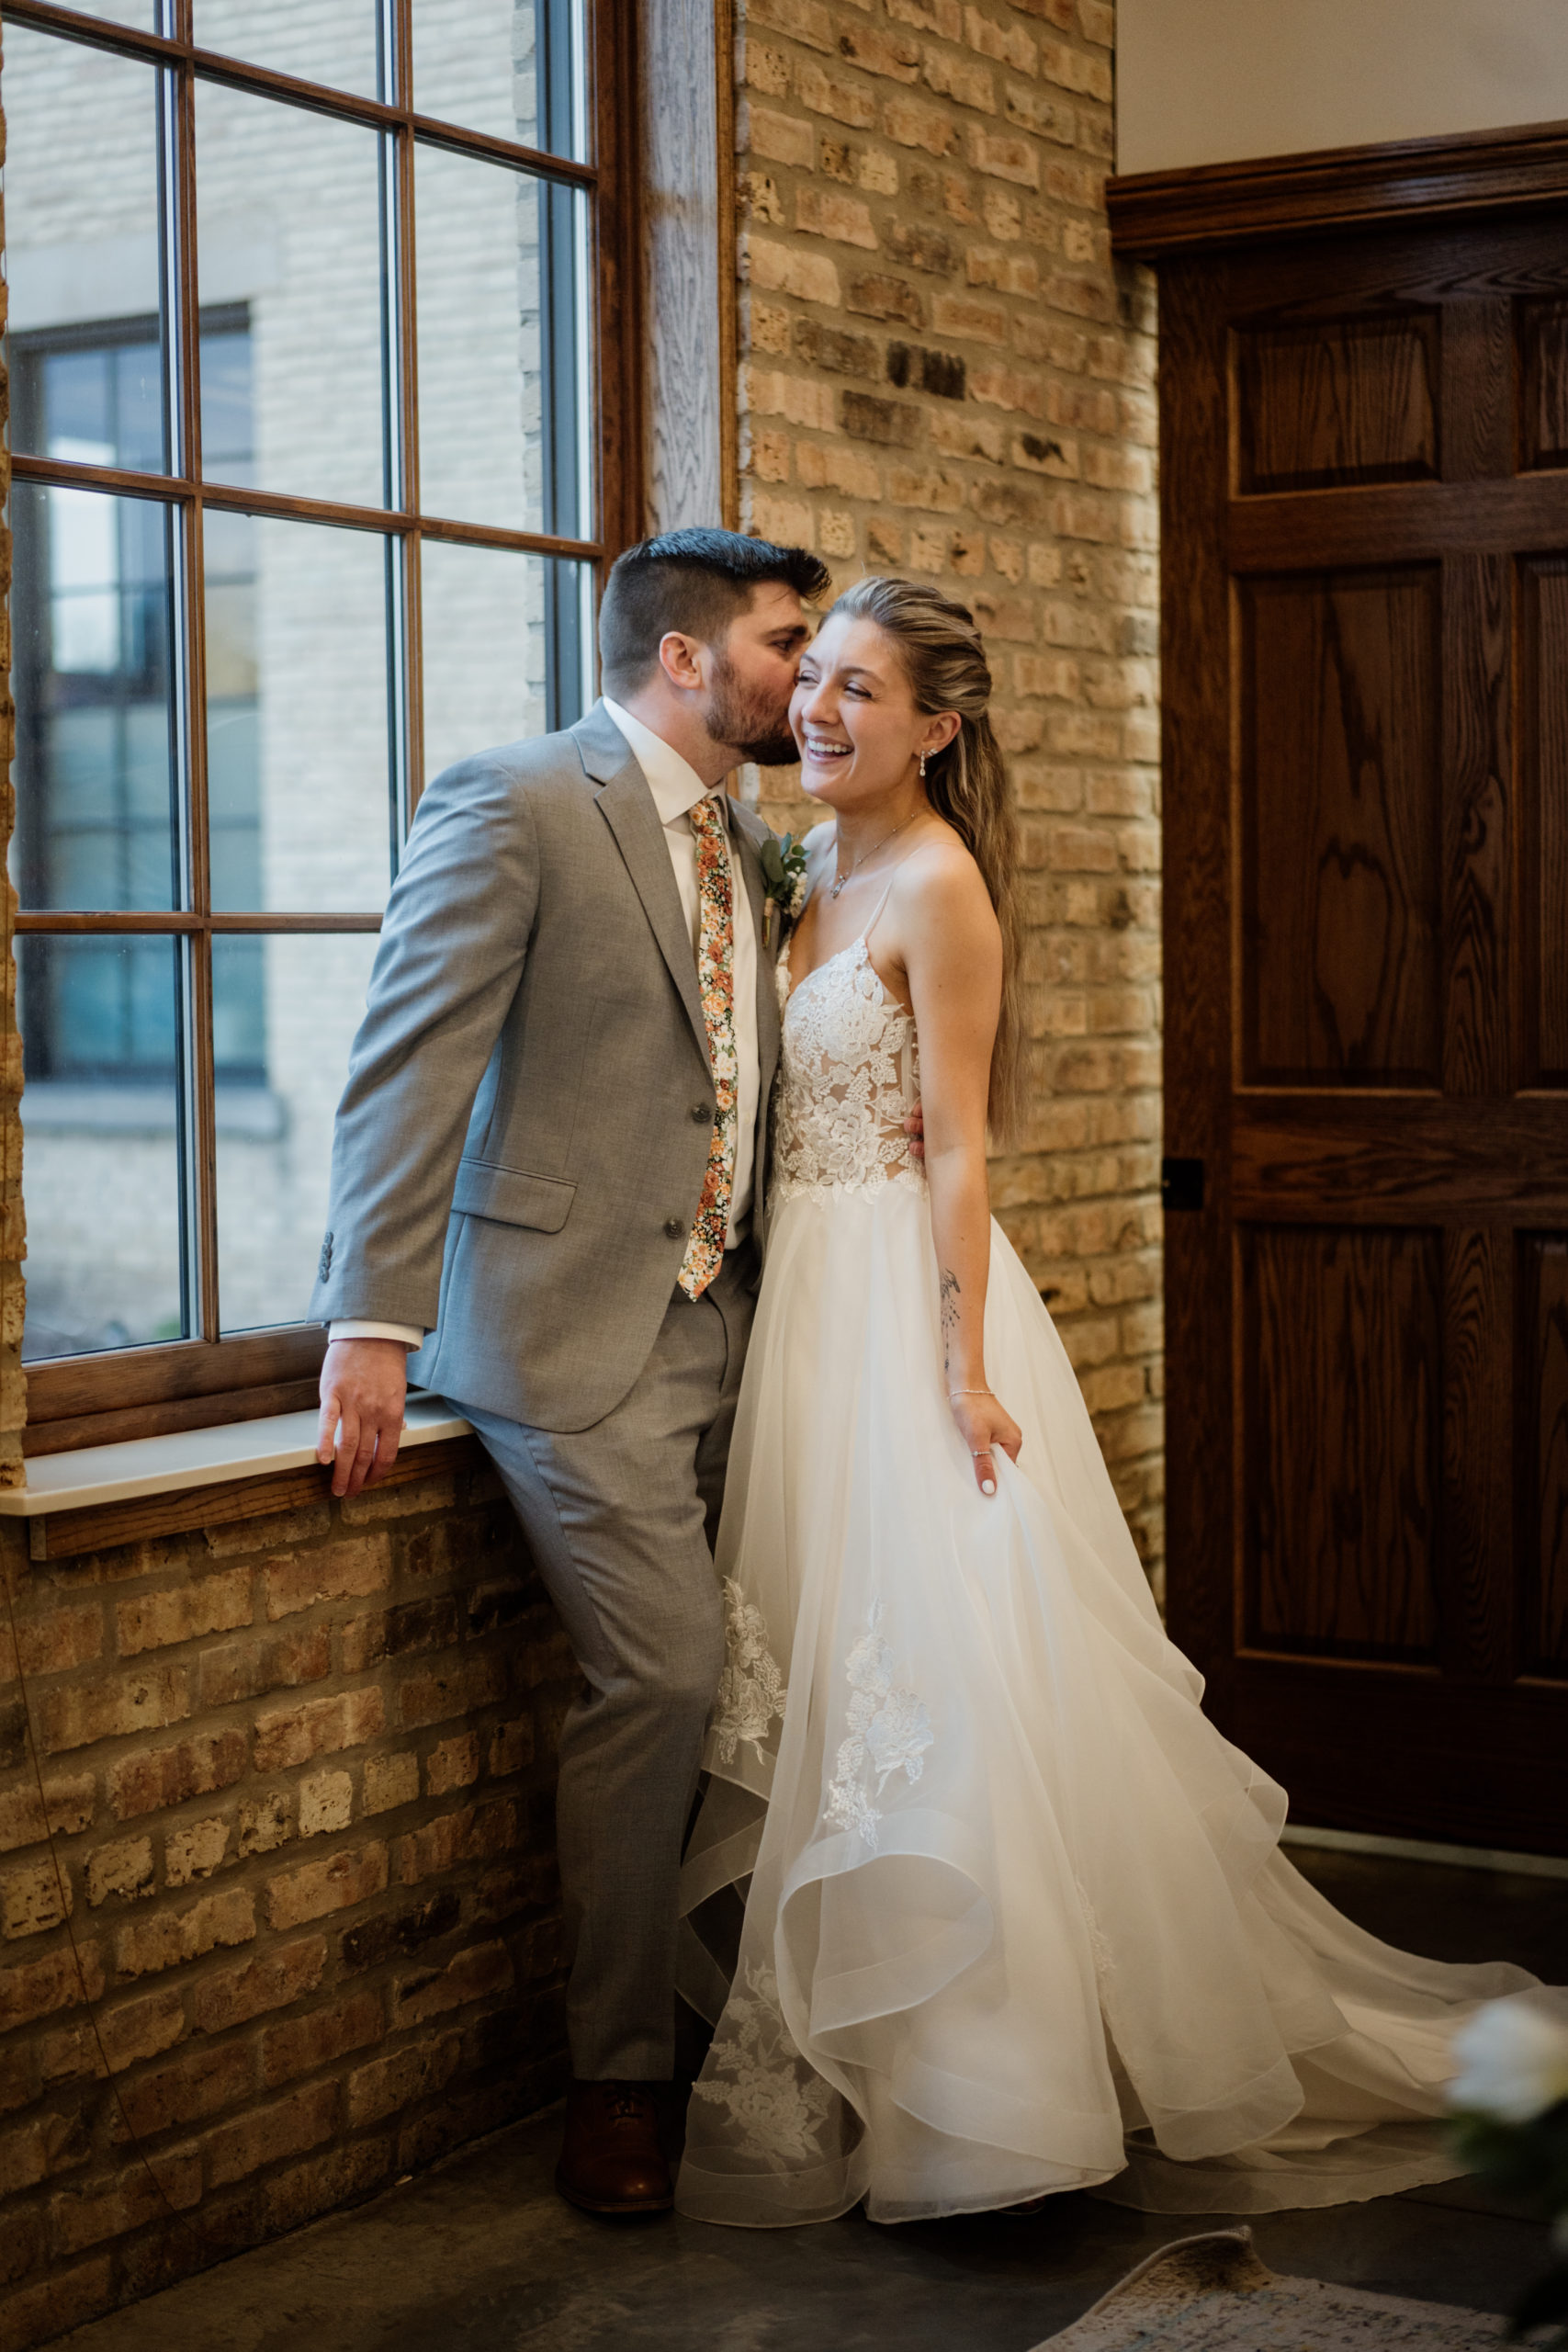 Midwest Wedding at The Brix on Fox | Chicago wedding photographer & videographer